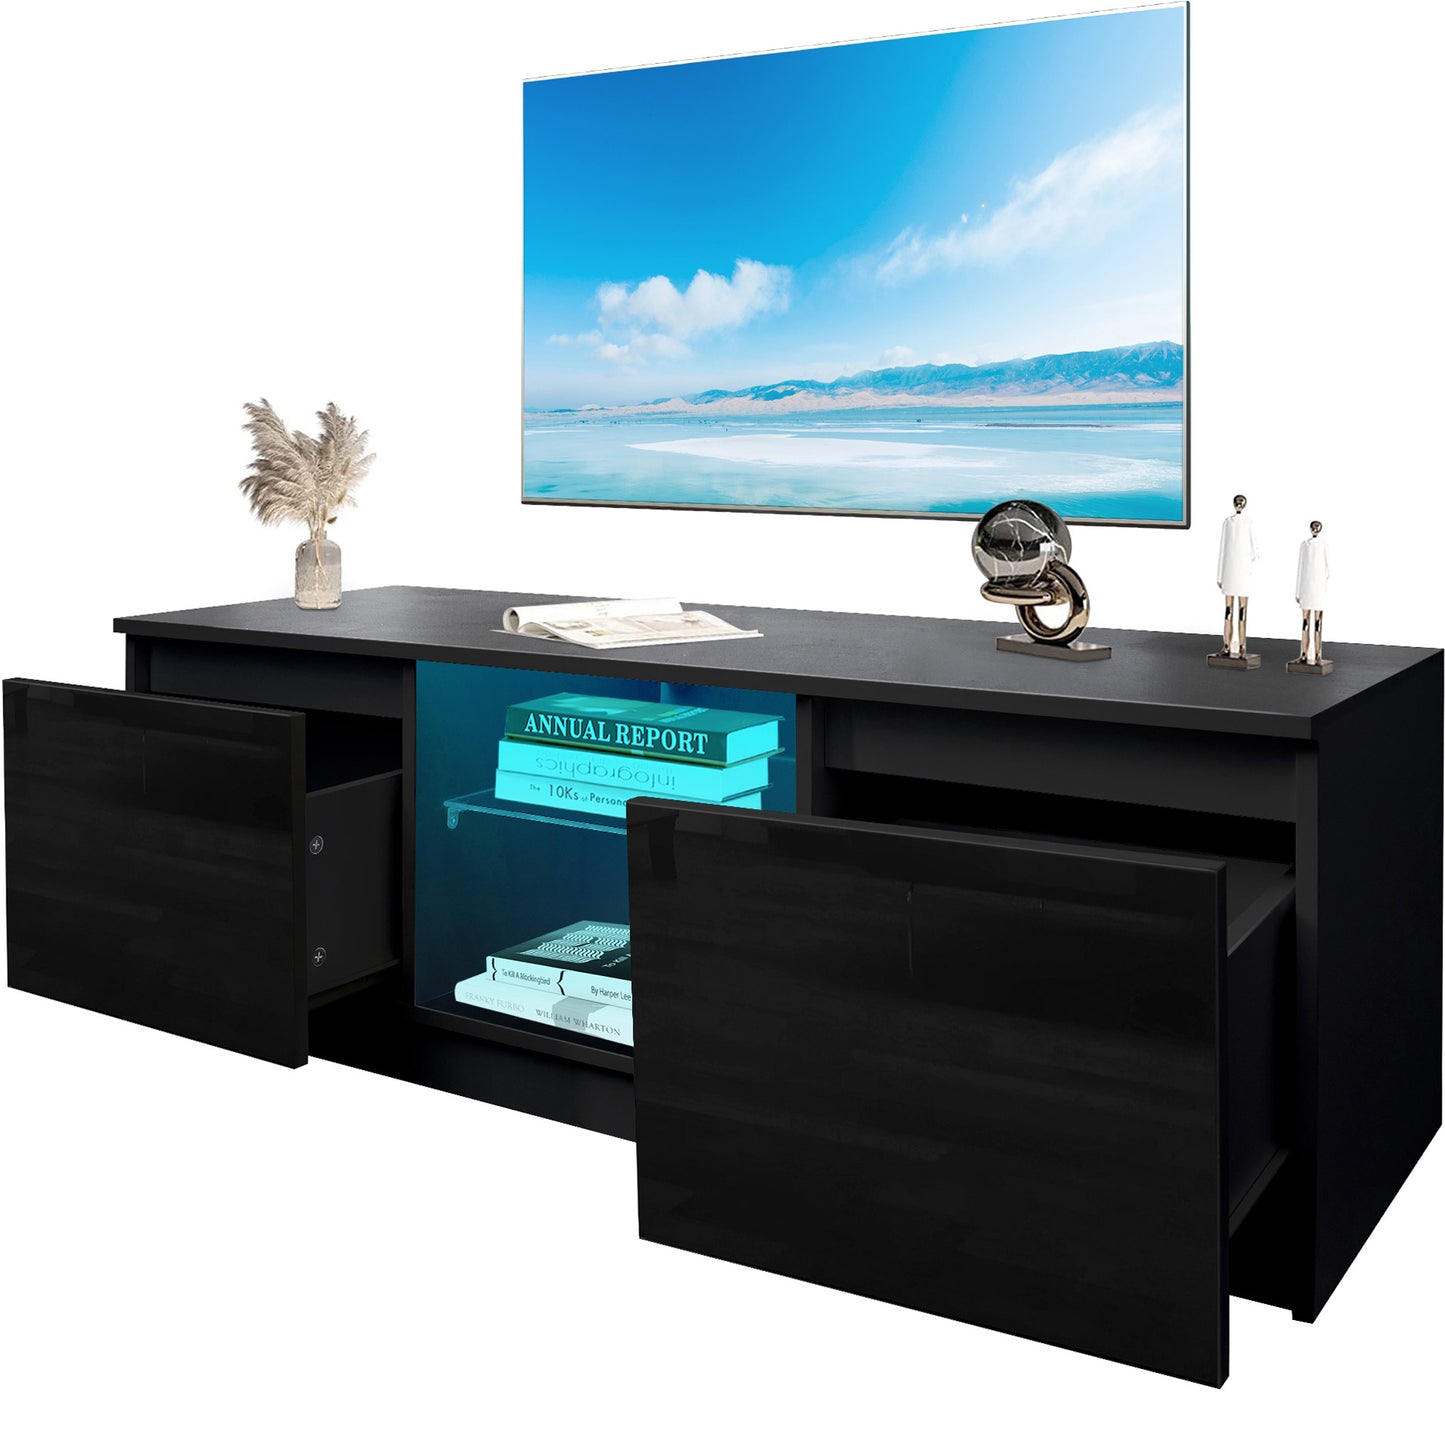 SYNGAR Black TV Stand for 55 inch TV, Modern High Glossy TV Console Table Stand with 16 Colors LED Lights, Living Room TV Table Stand Buffet Cabinet with Storage, 47"L×16" W×16" H